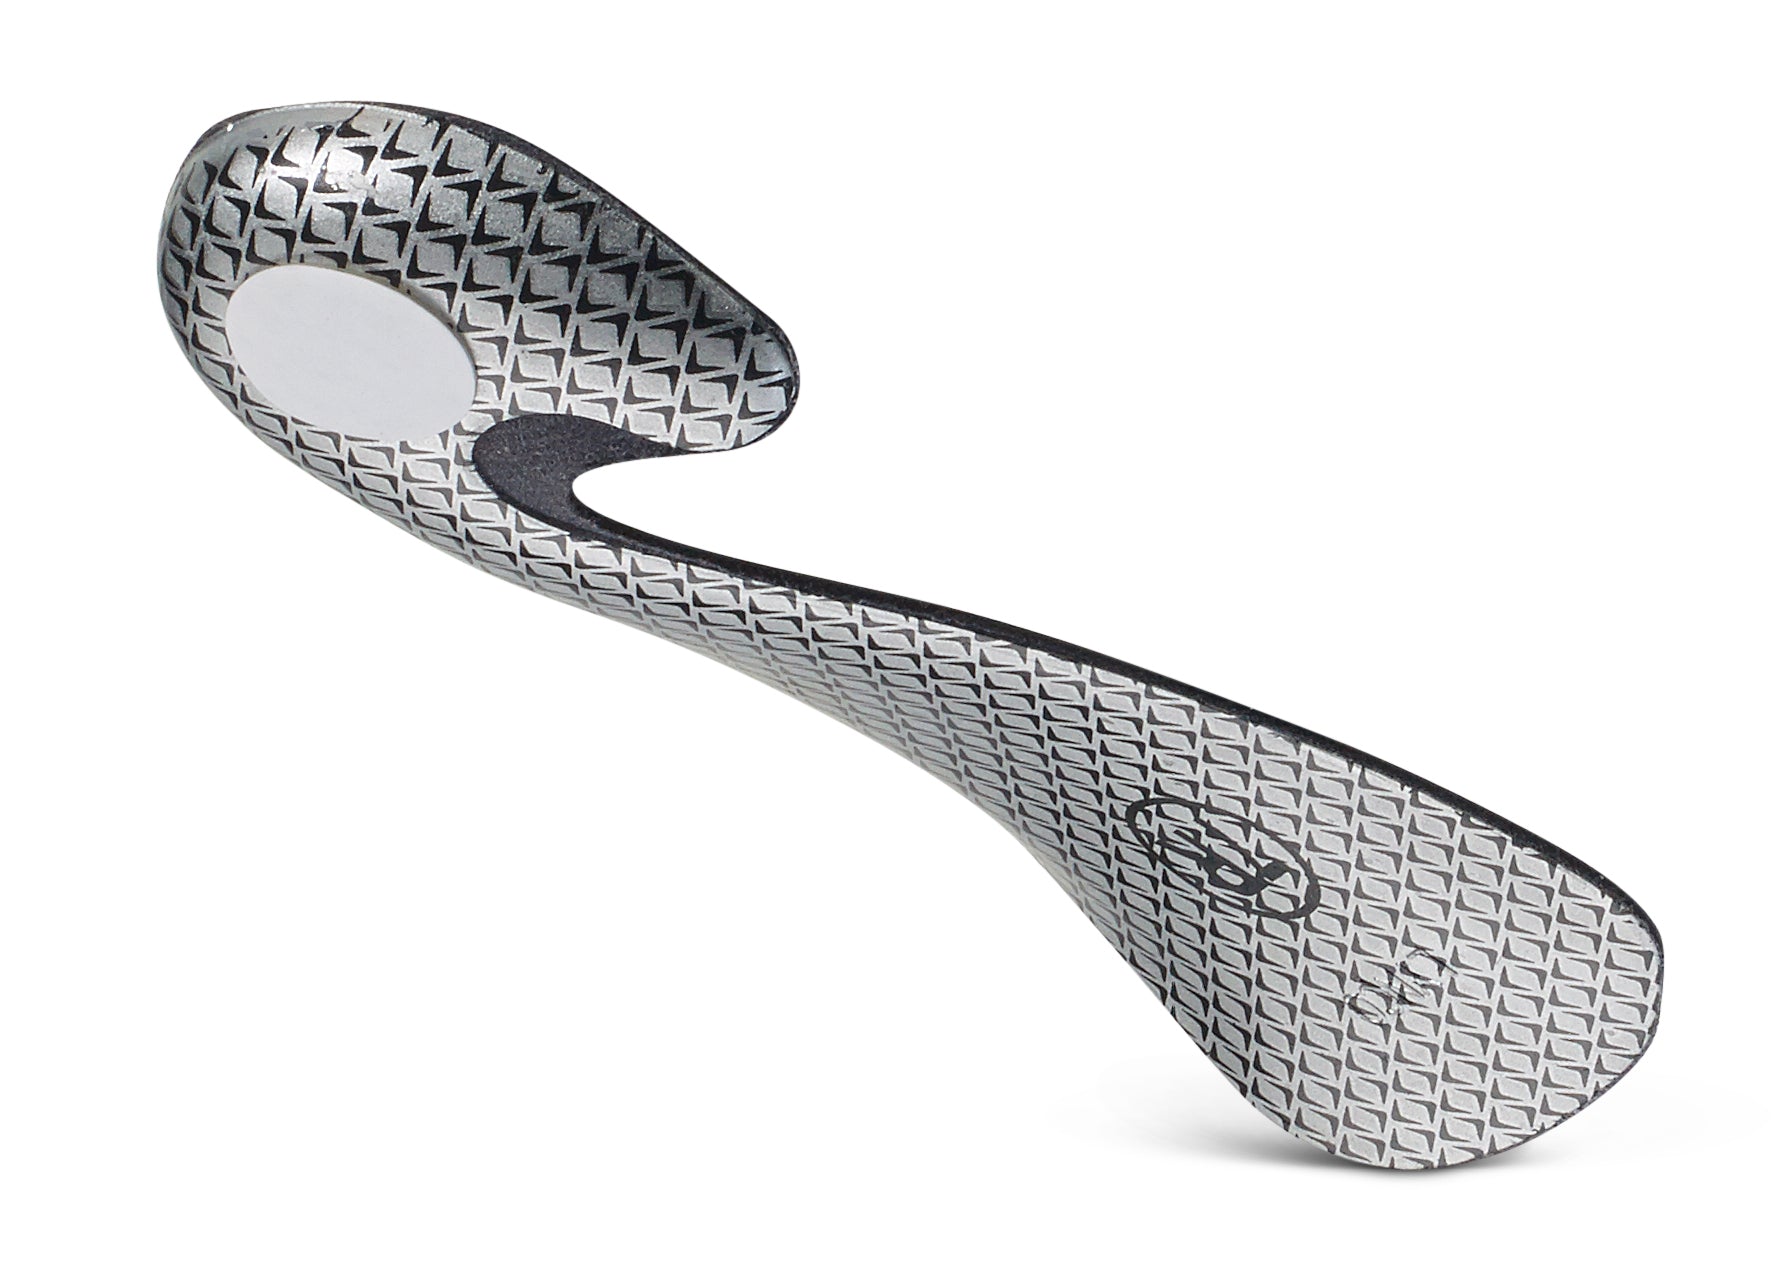 In-Style/Fashion Orthotics - Insole for Dress Shoes